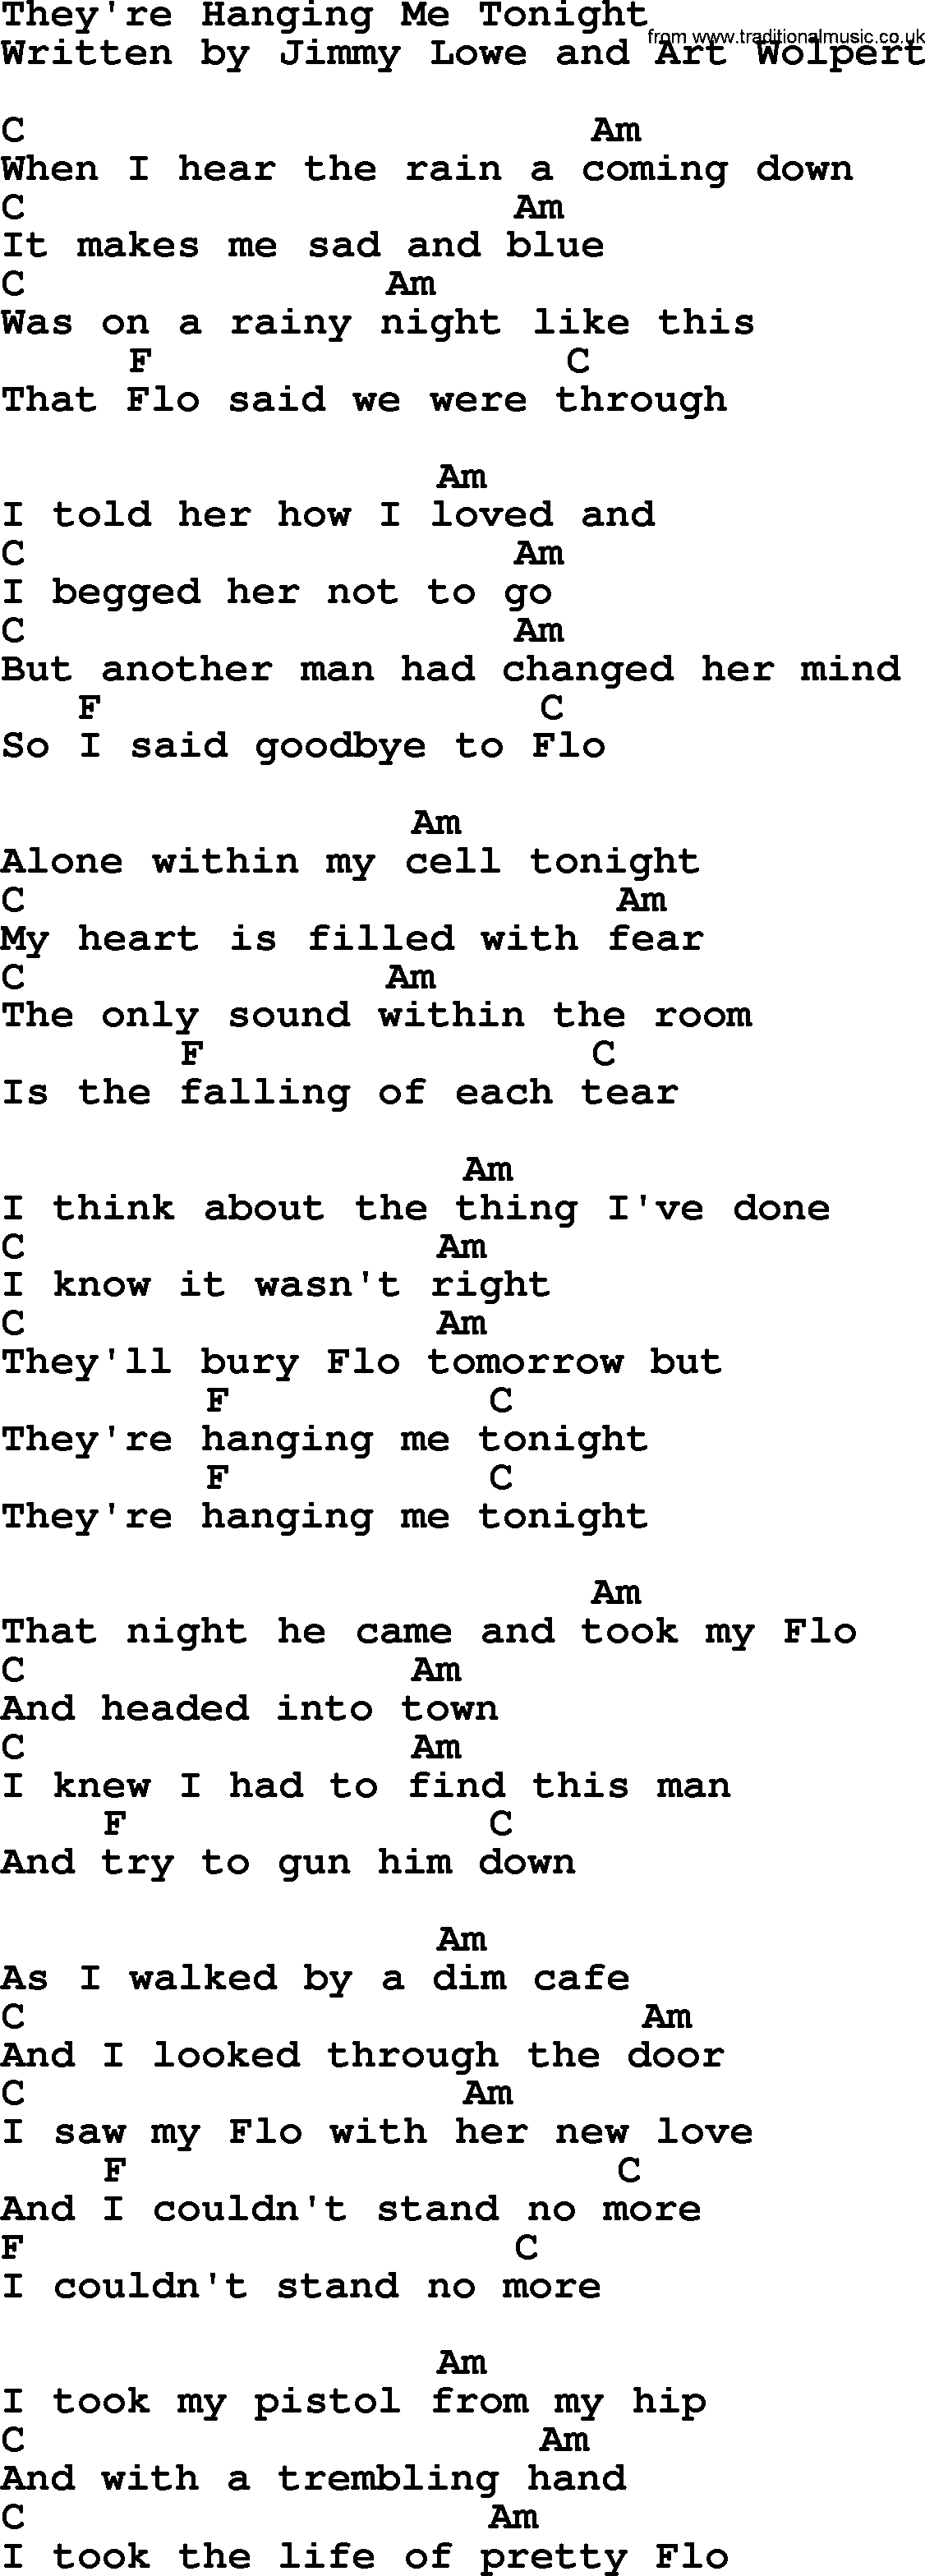 Marty Robbins song: They're Hanging Me Tonight, lyrics and chords